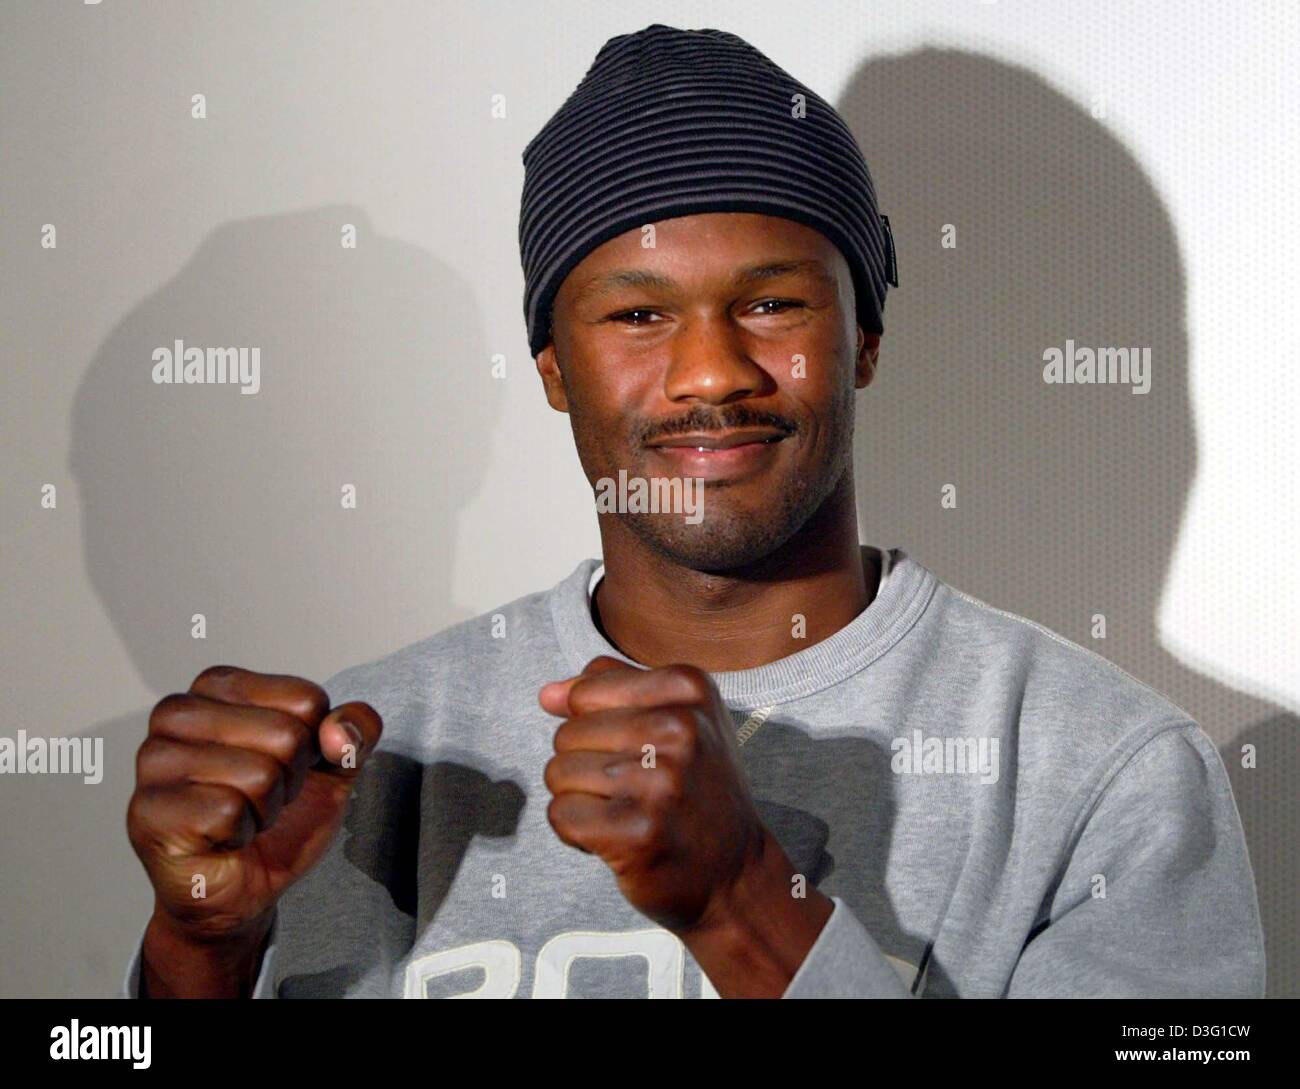 (dpa) - US boxer Derrick Harmon pose with his fist up for a publicity shot at the Cinemaxx in Hamburg, Germany, 25 March 2003. Harmon is the current challenger to the World Champion title in light heavyweight boxing. He will fight against the current champion Polish boxer Dariusz Michalczewski at the WBO (World Boxing Organisation) world champions fight in light heavyweight boxing  Stock Photo